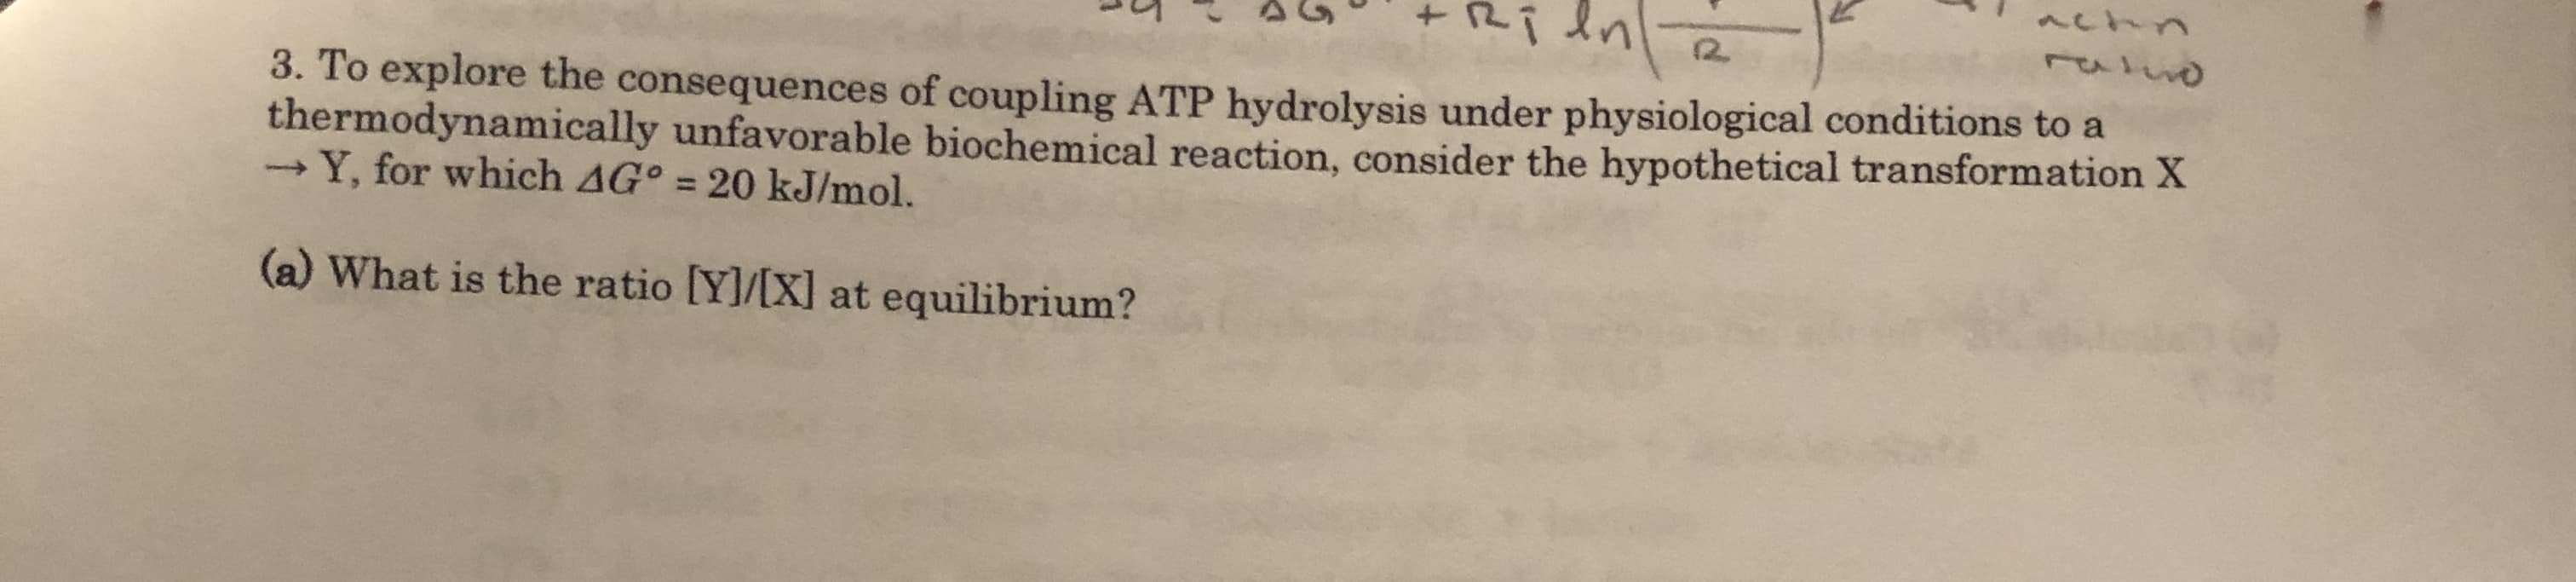 Ri dn
12.
3. To explore the consequences of coupling ATP hydrolysis under physiological conditions to a
thermodynamically unfavorable biochemical reaction, consider the hypothetical transformation X
-Y, for which AG° = 20 kJ/mol.
(a) What is the ratio [Y]/[X] at equilibrium?
